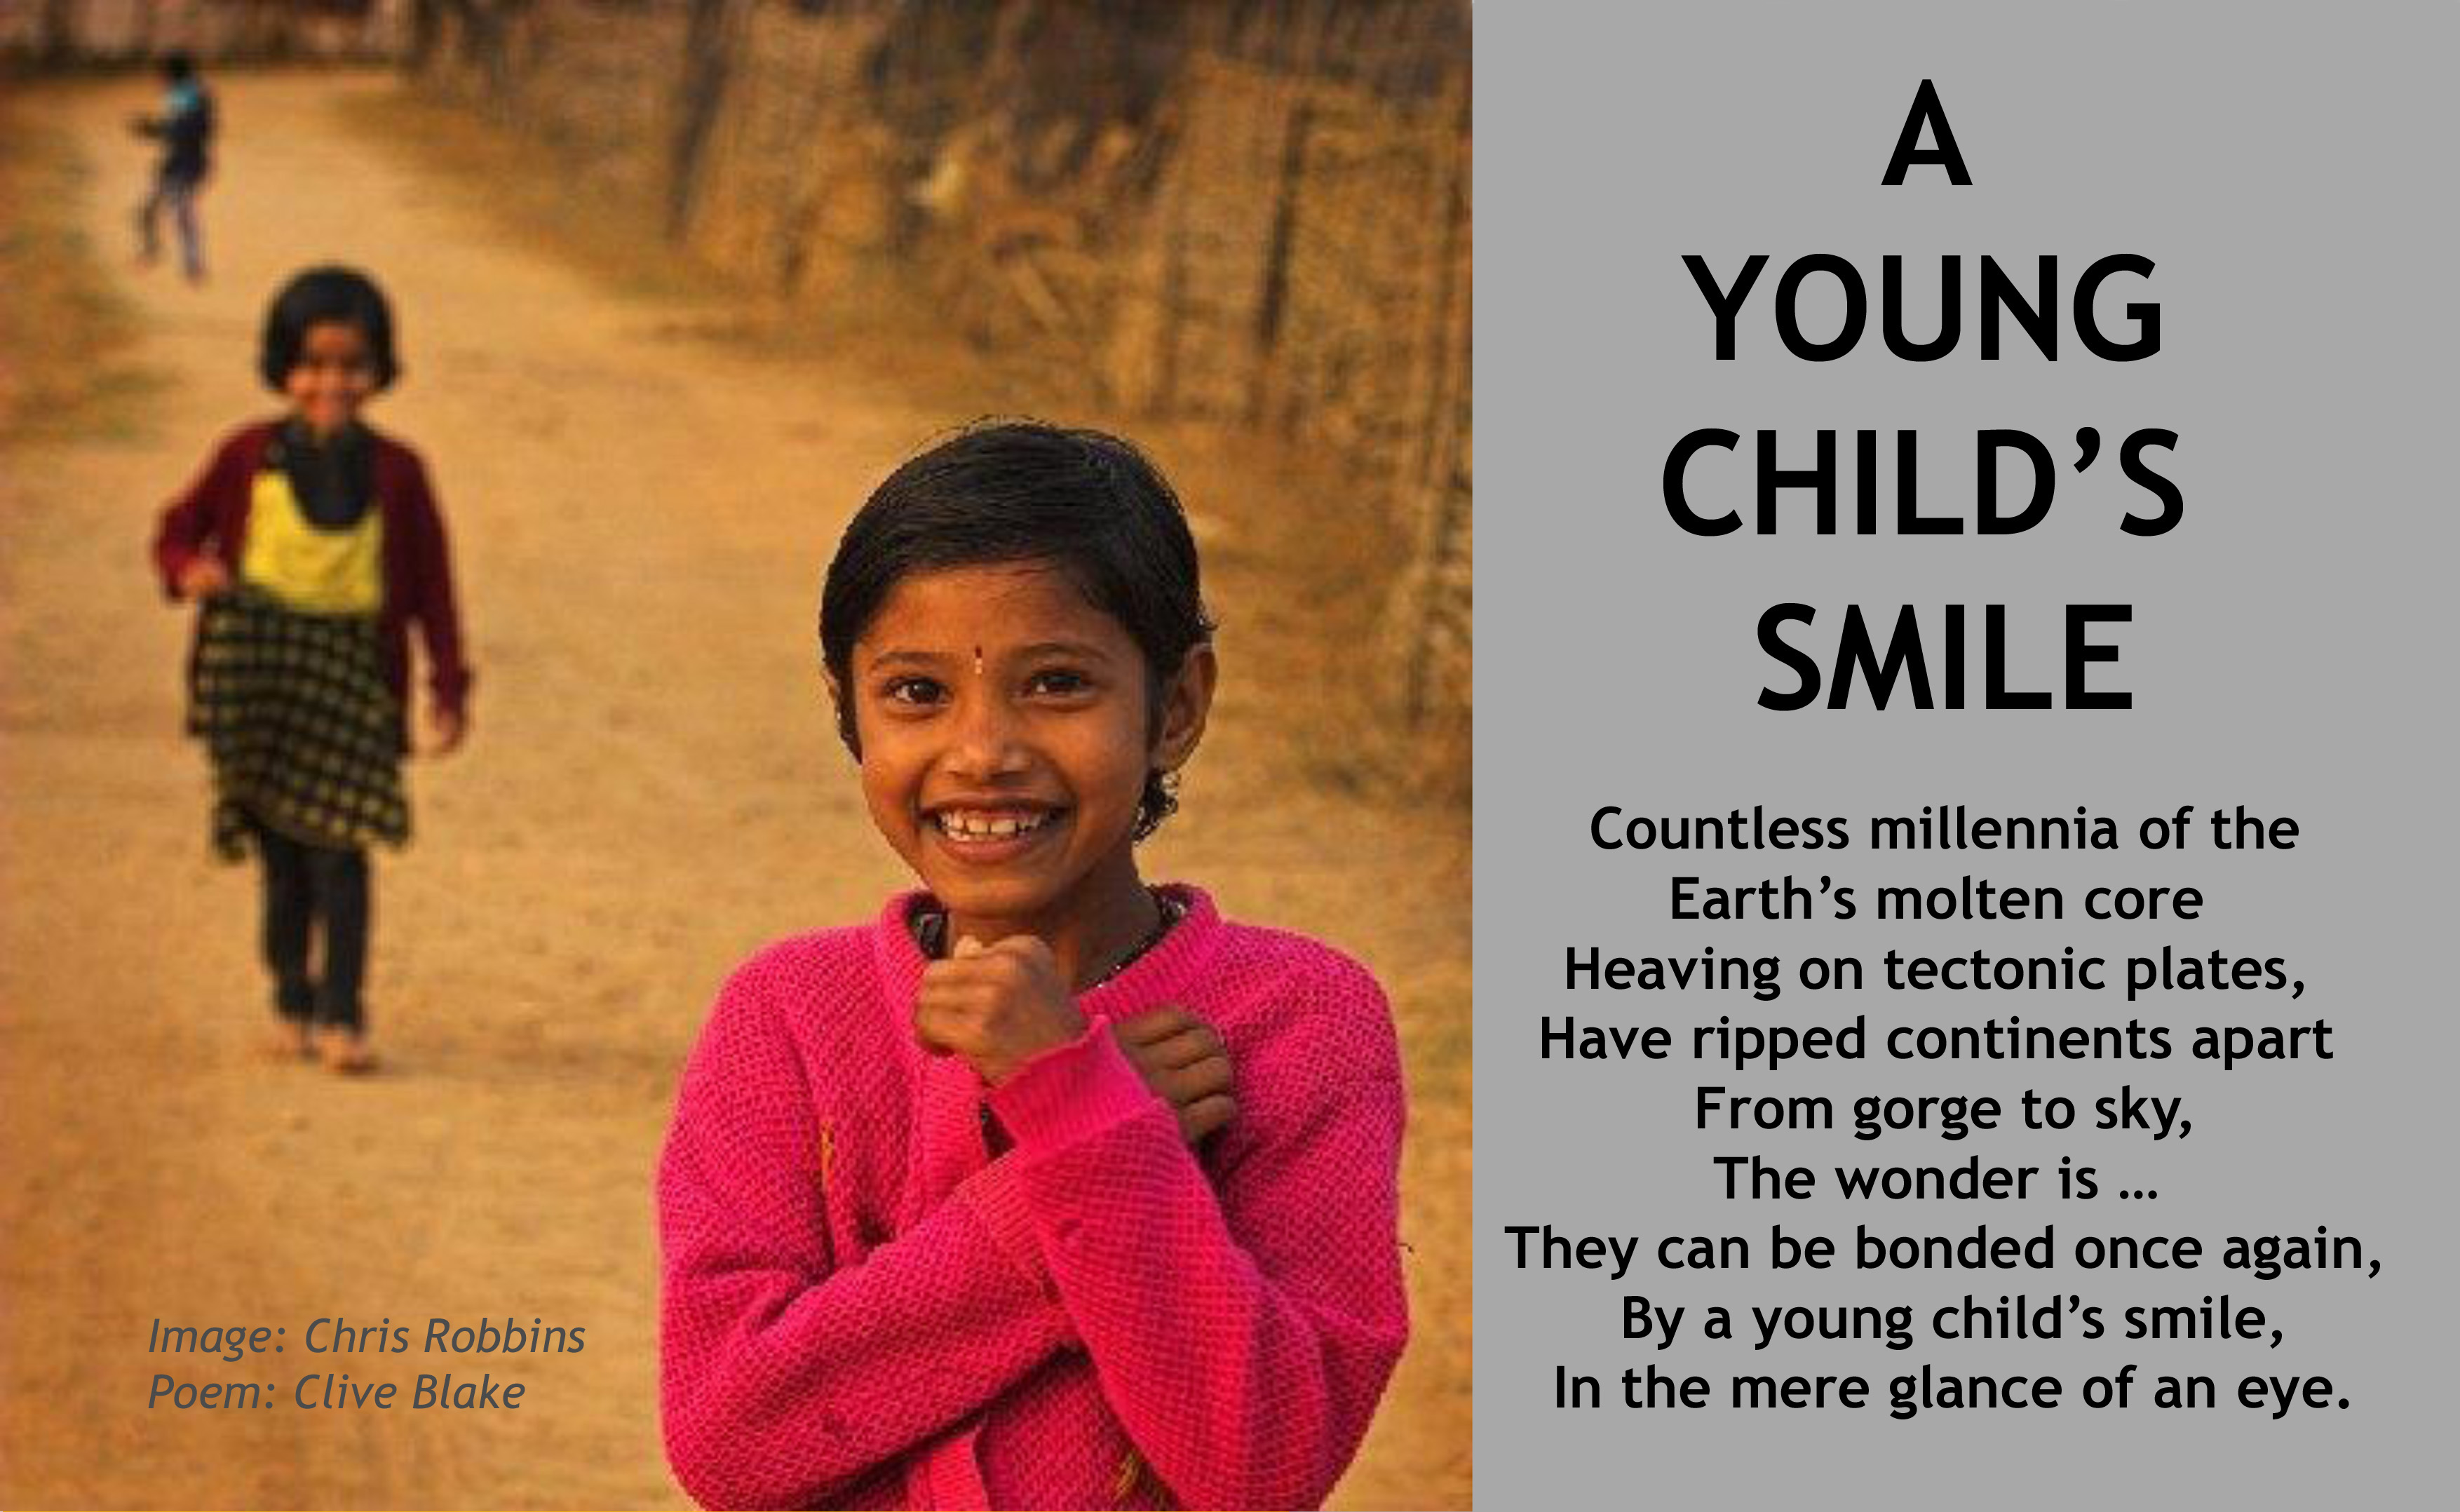 A Young Child's Smile